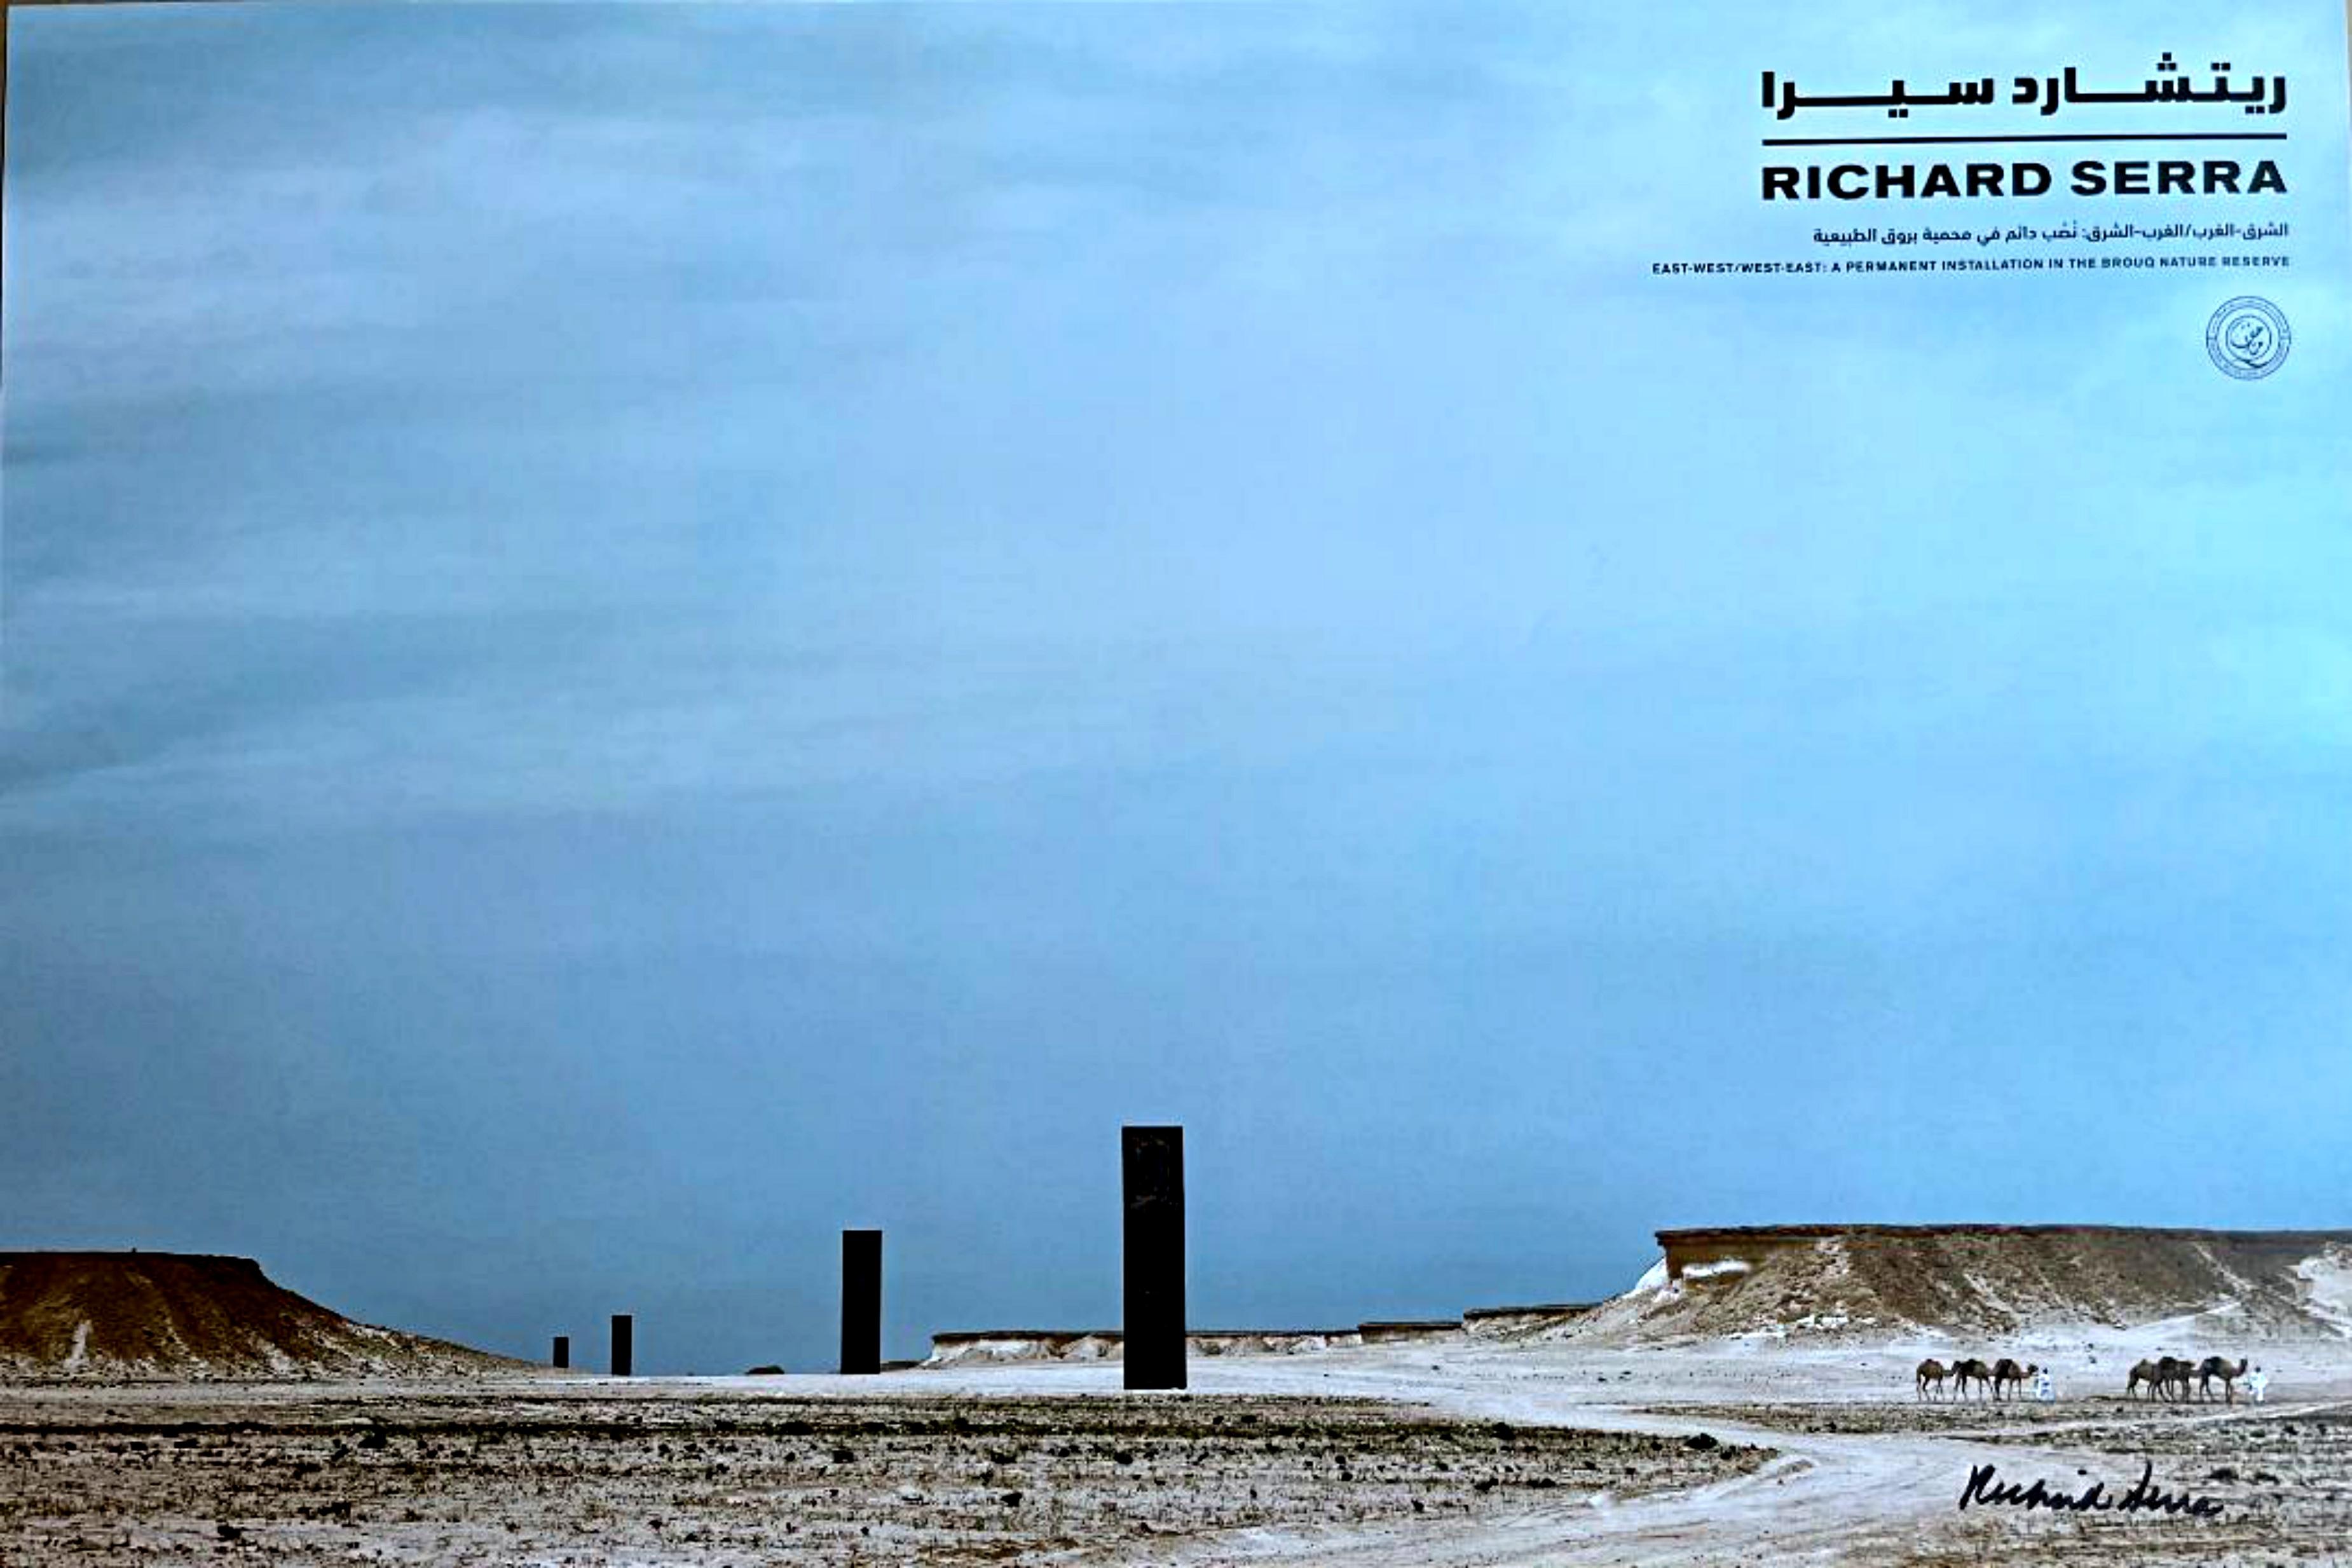 Richard Serra
East-West/West-East: A Permanent in the Brouq Nature Reserve, Qatar (Hand Signed by Richard Serra), ca. 2014
Superb provenance: donated by the artist to a major contemporary art organization
Very rare offset lithograph (Hand Signed by